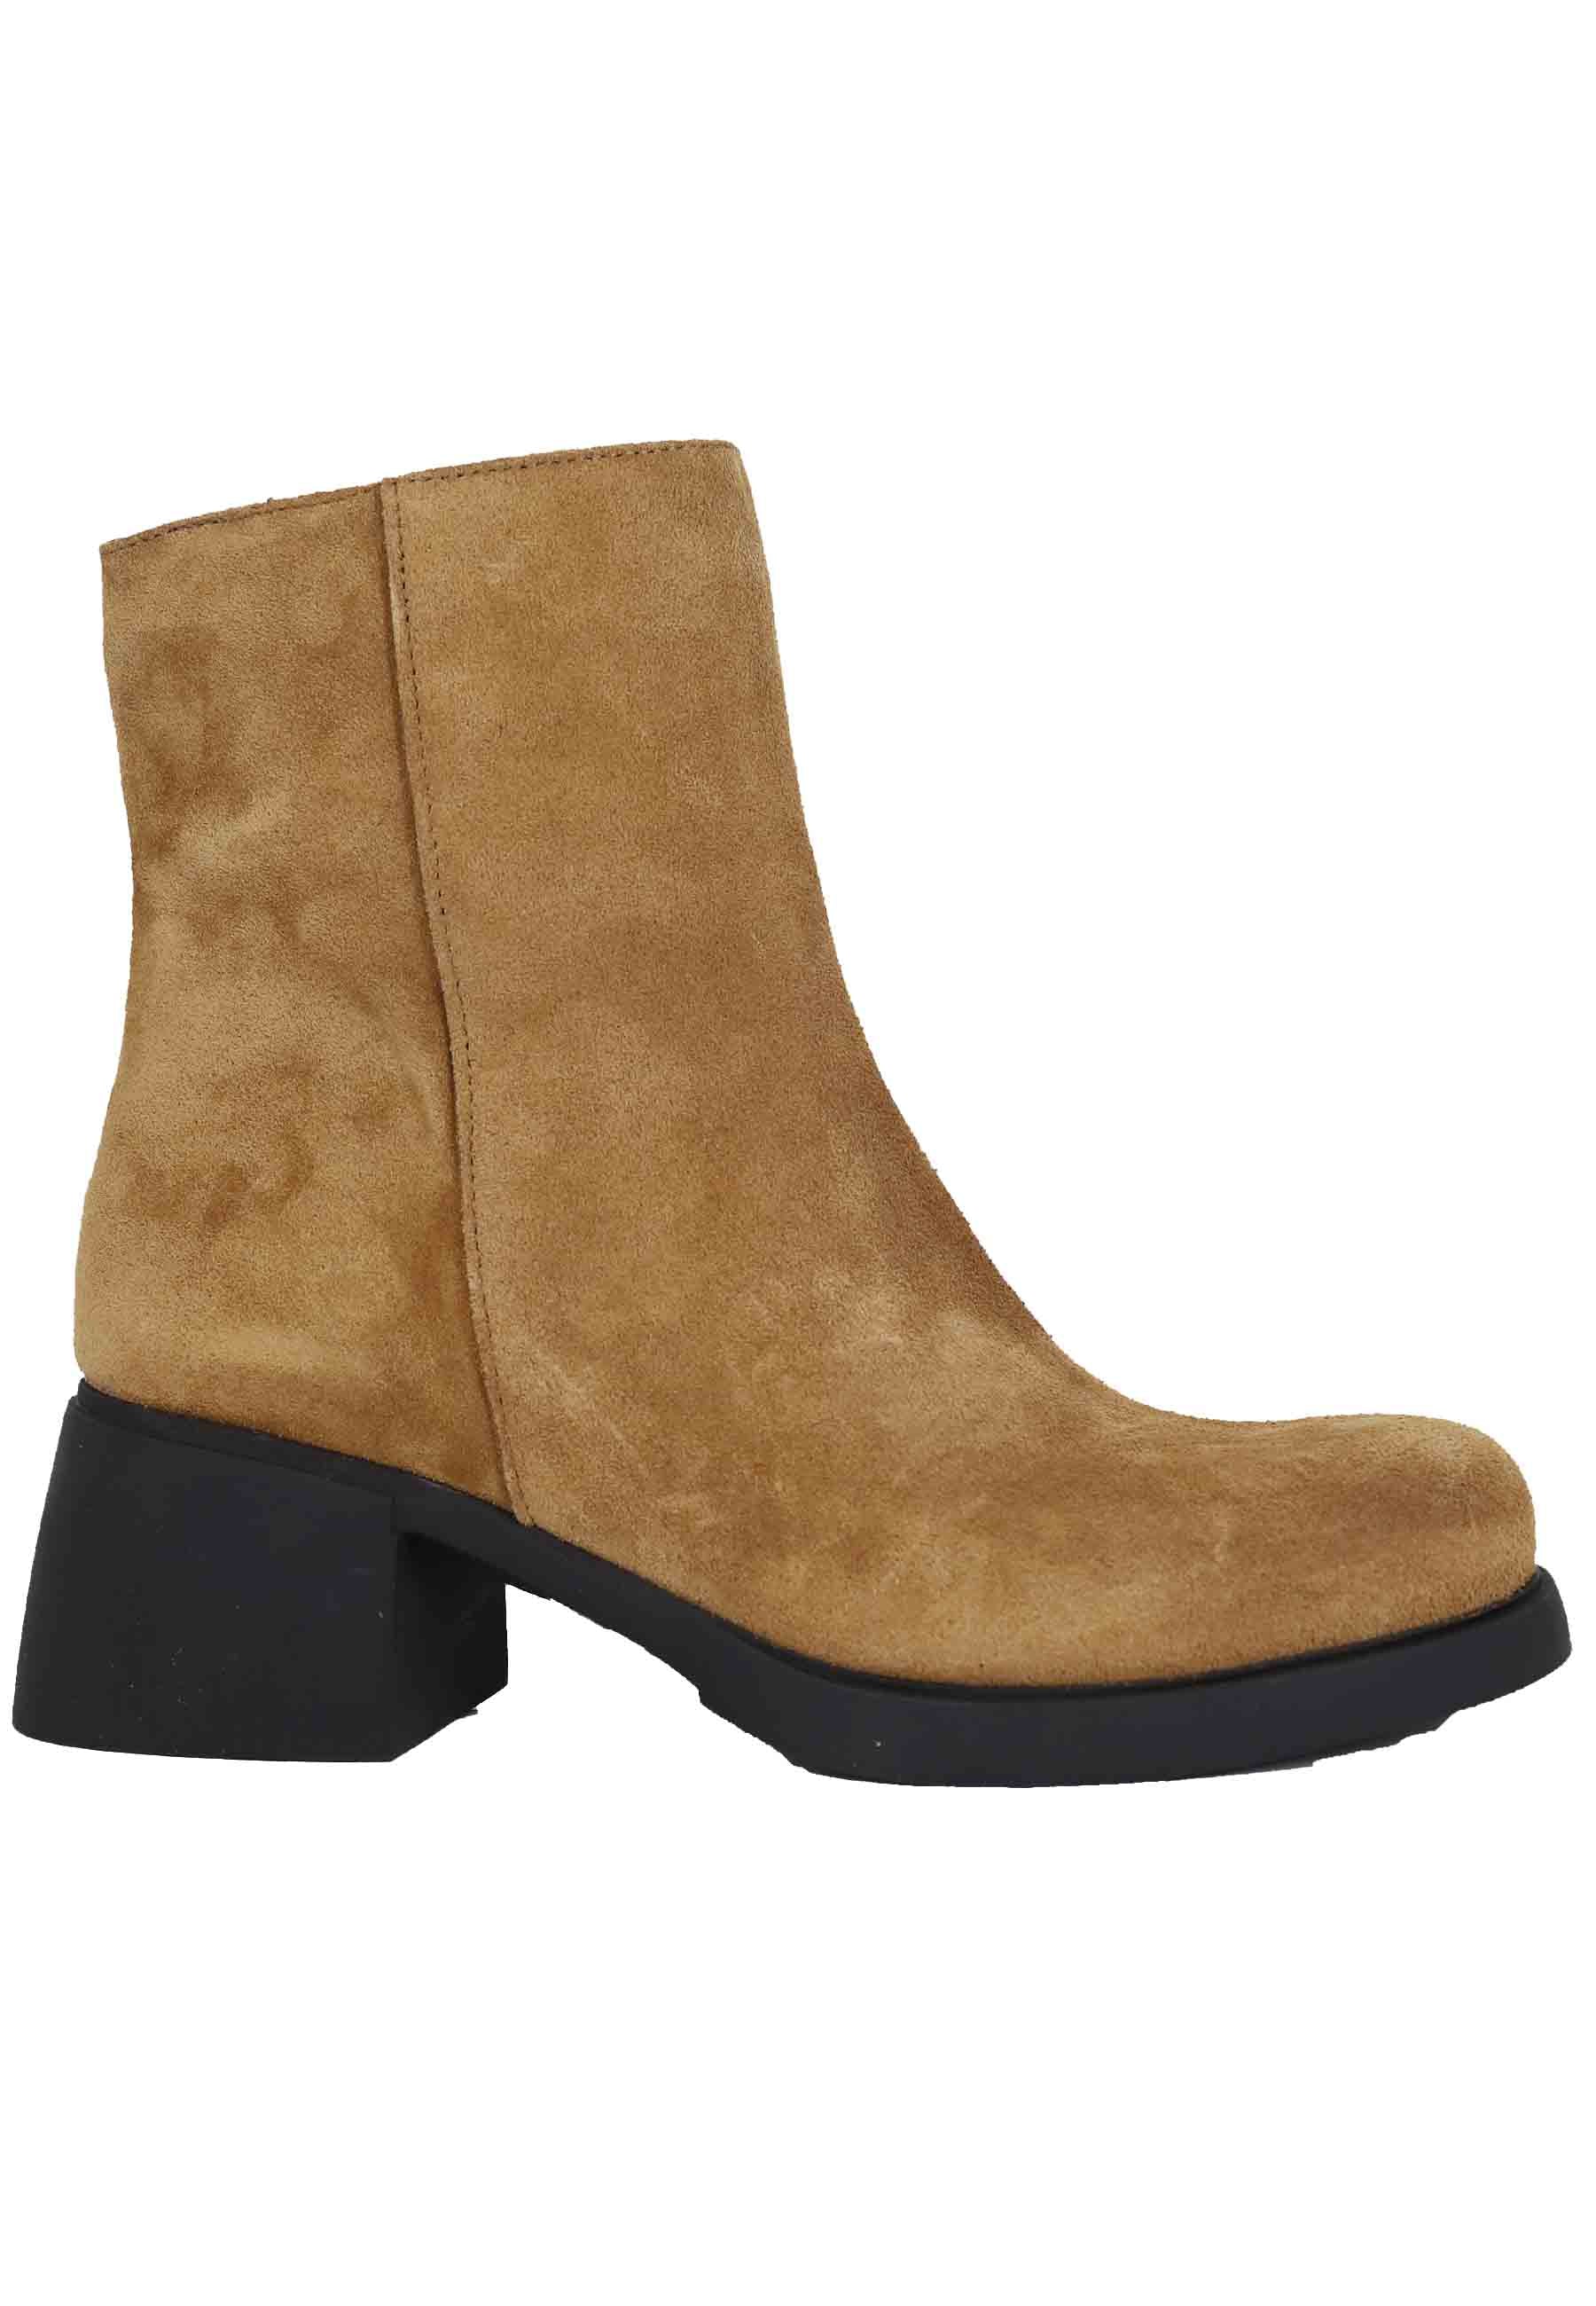 Women's ankle boots in leather suede with rubber sole and round toe